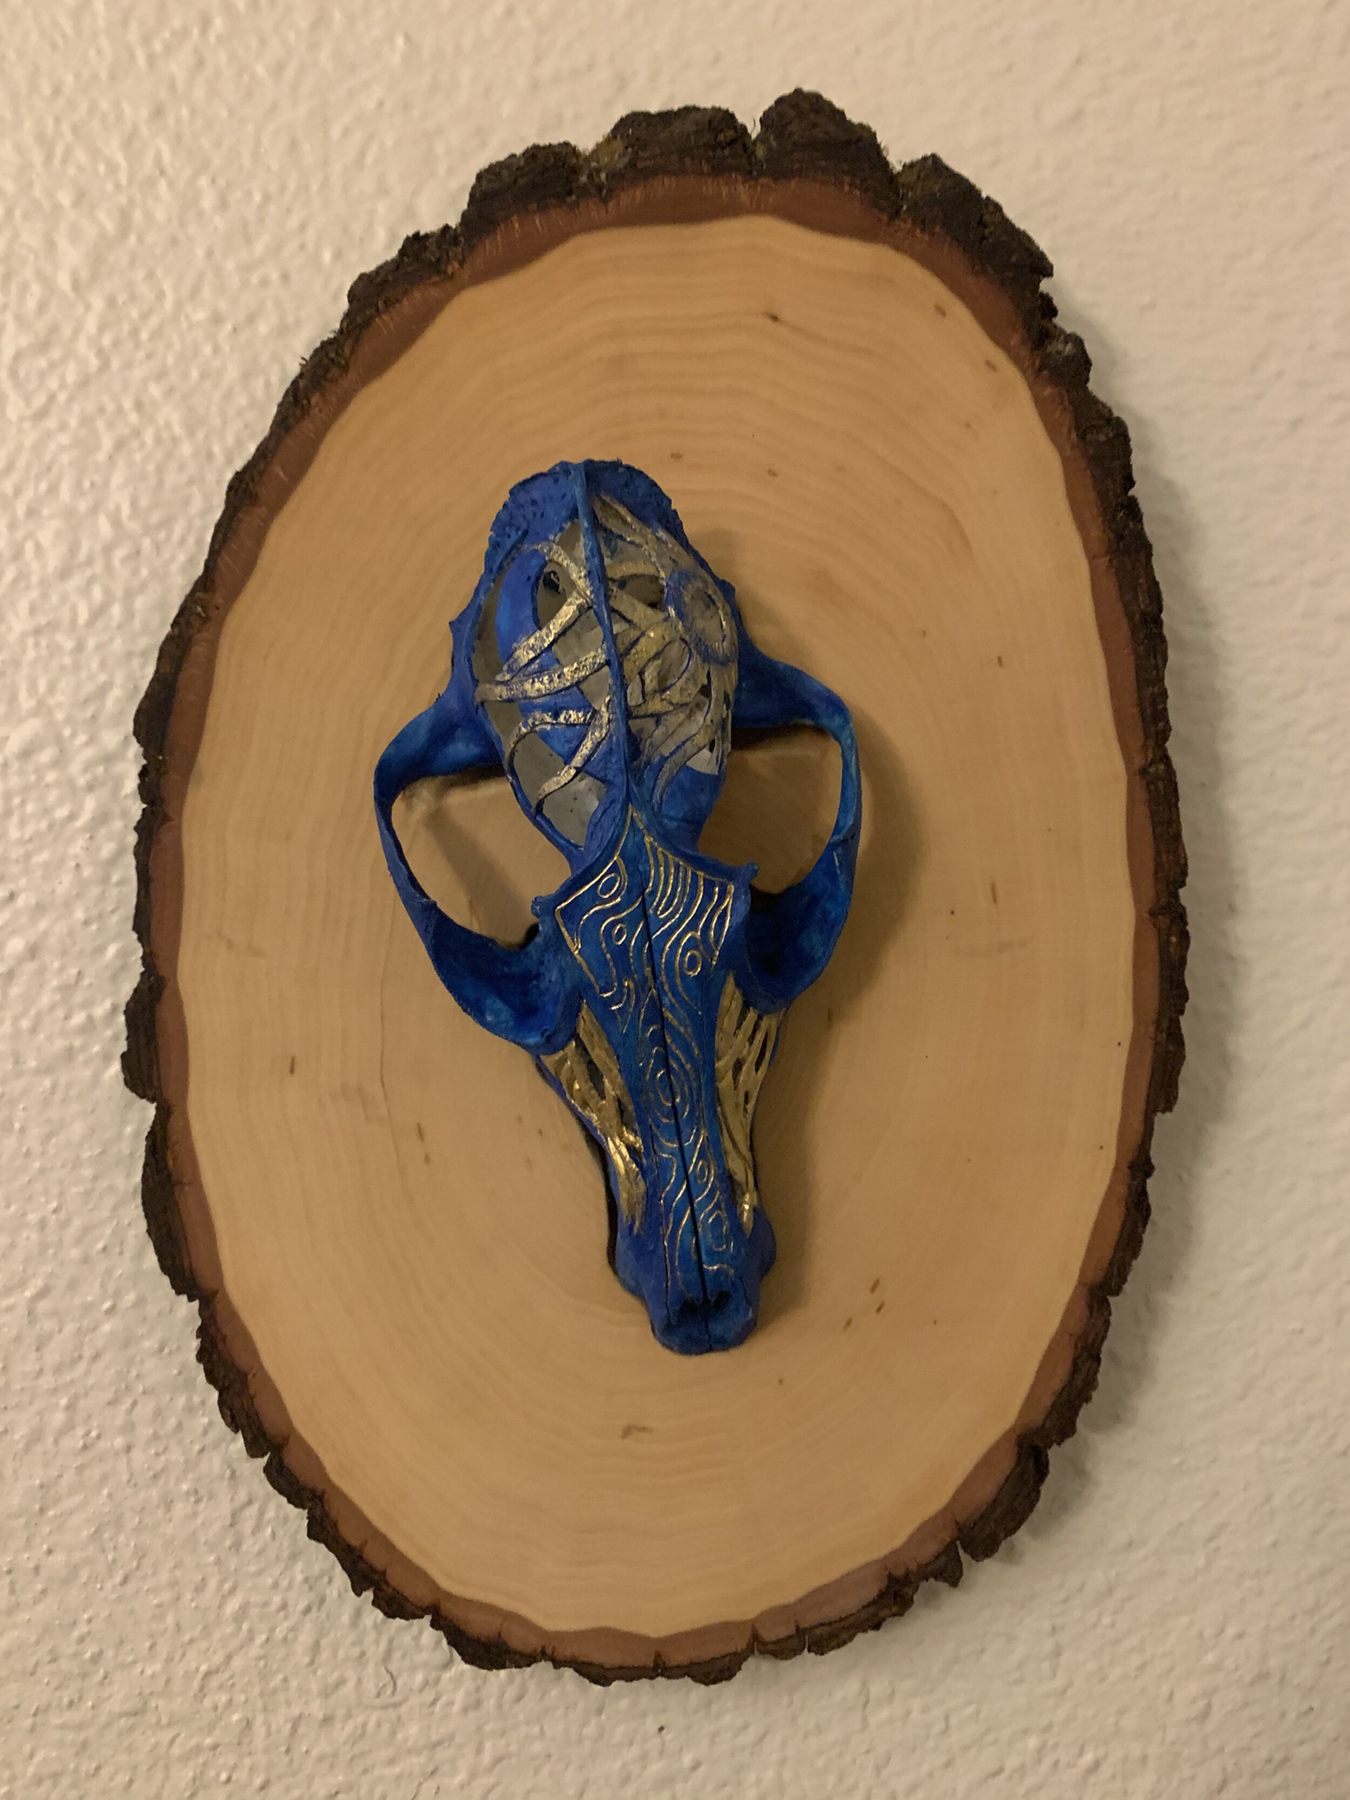 Natural fox skull affixed to basswood and colored with acrylic paint and alcohol ink. Image courtesy of Indi Walter